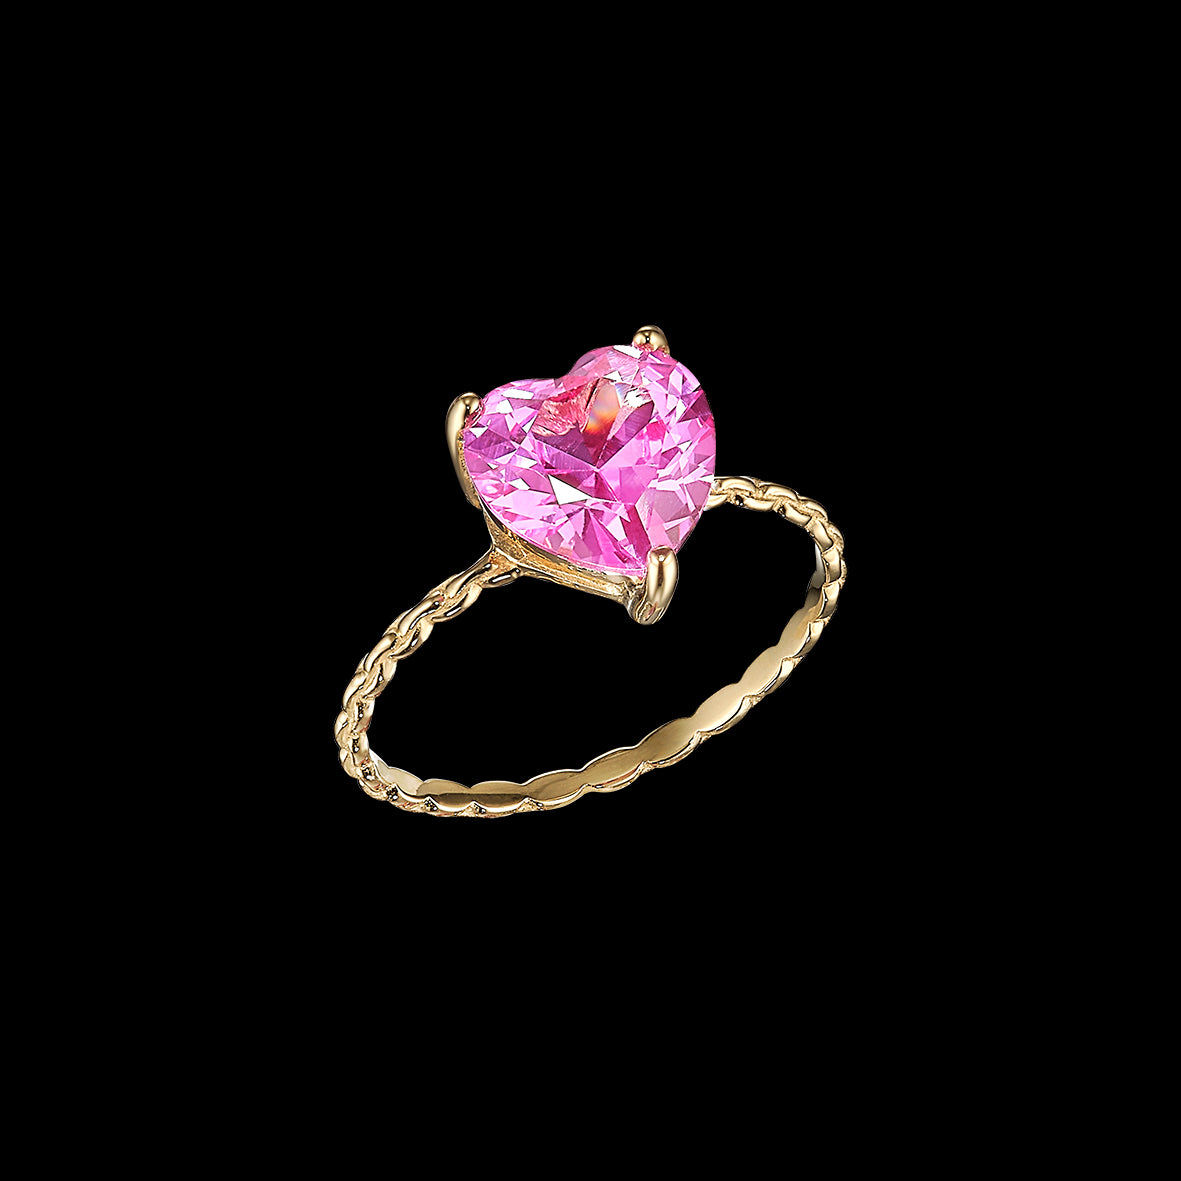 Buy CANDERE - A KALYAN JEWELLERS COMPANY 14K BIS Hallmark Rose Gold Heart  Ring for Women, Size 10 at Amazon.in